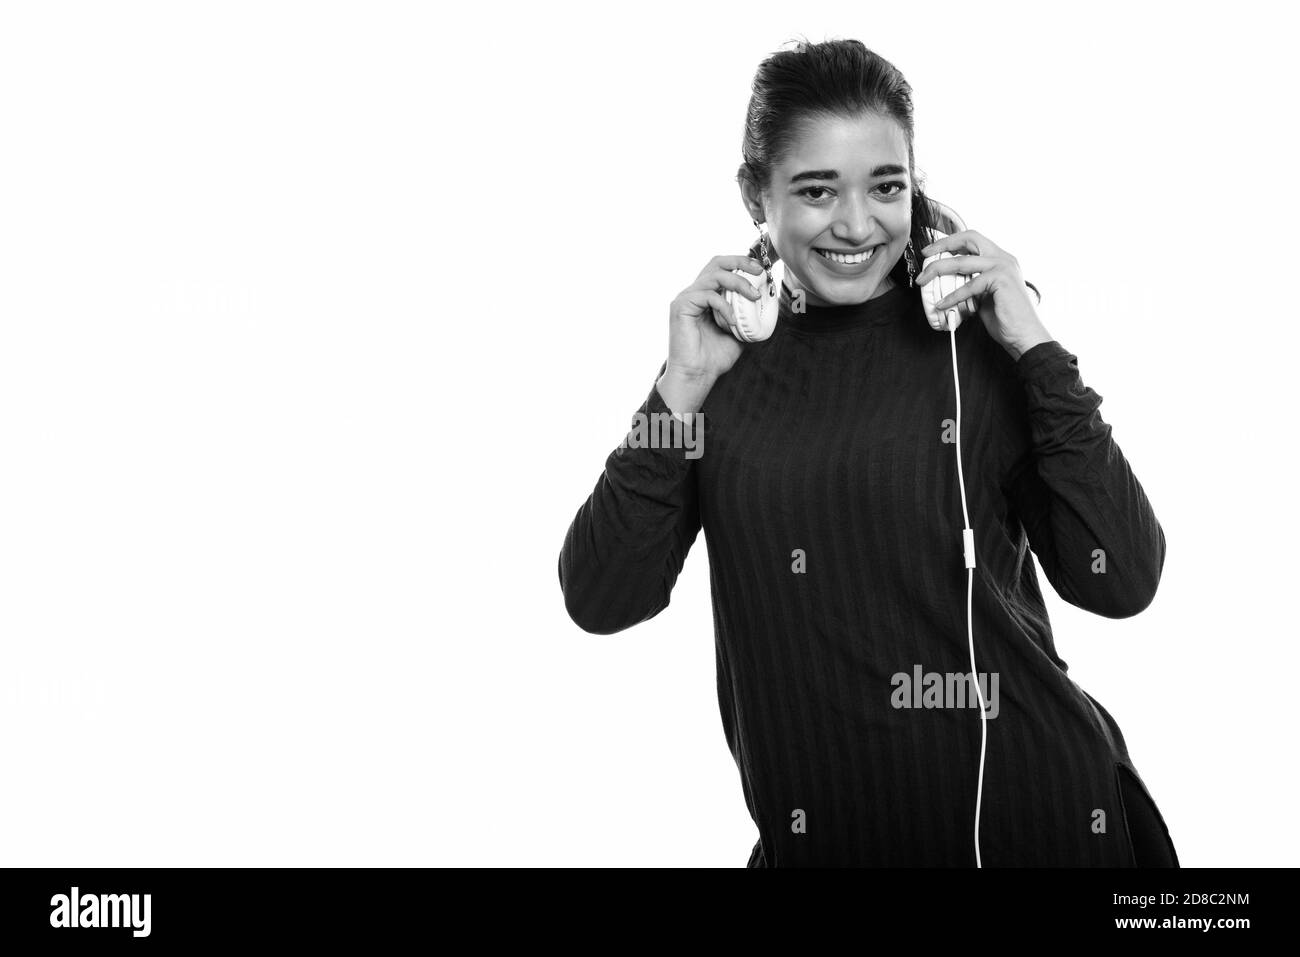 Young happy Indian woman smiling while holding headphones Stock Photo